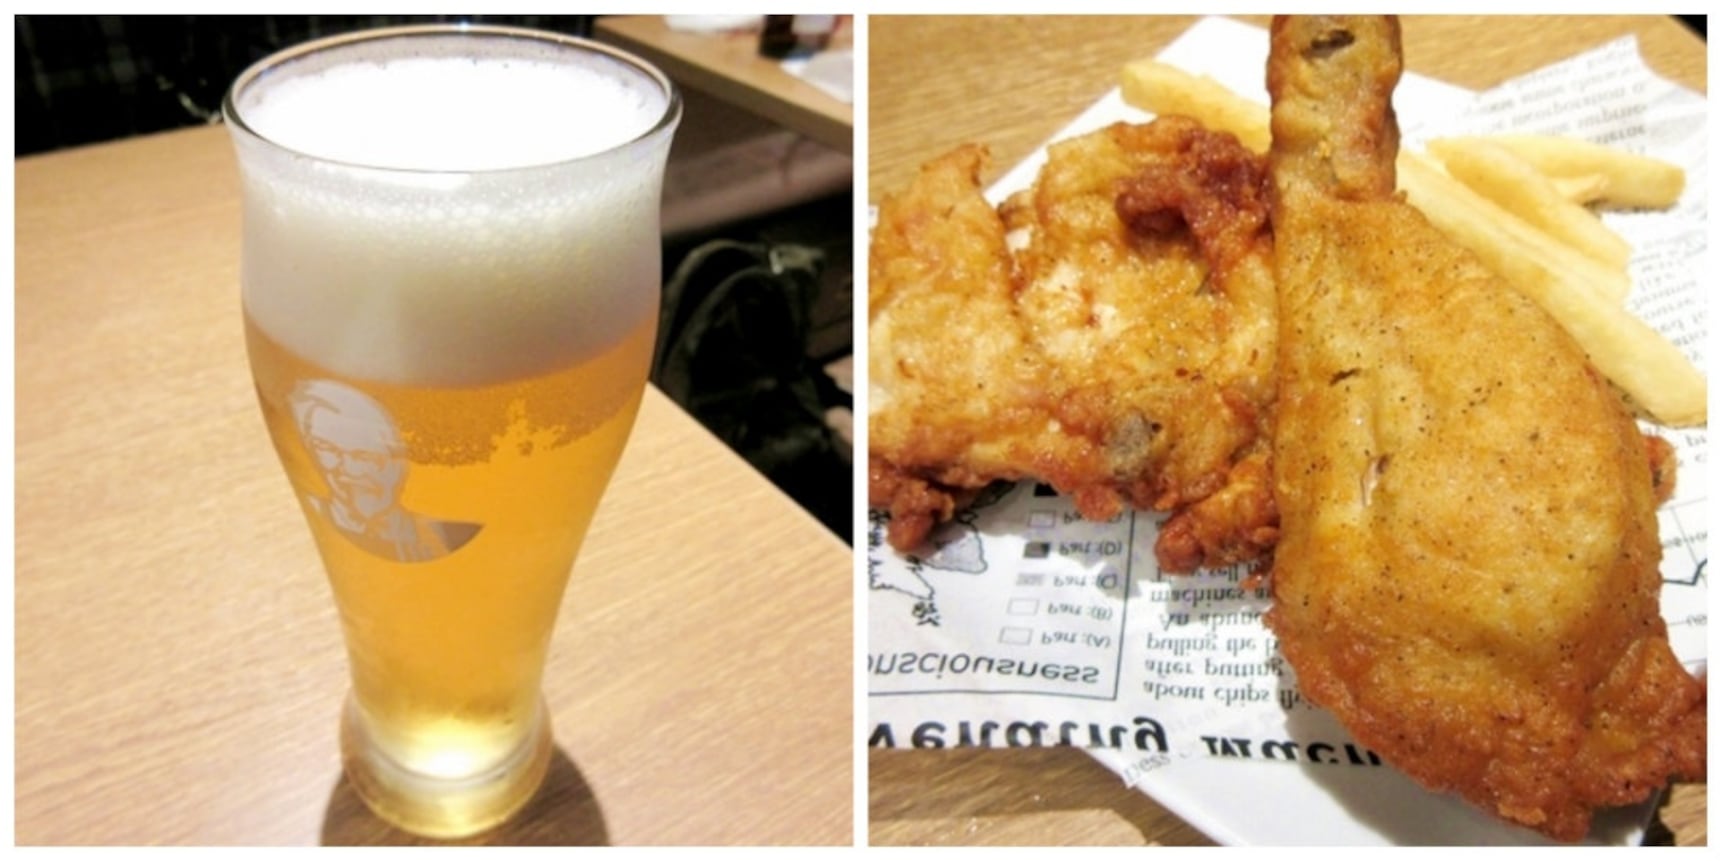 Want to Get a Beer at KFC?